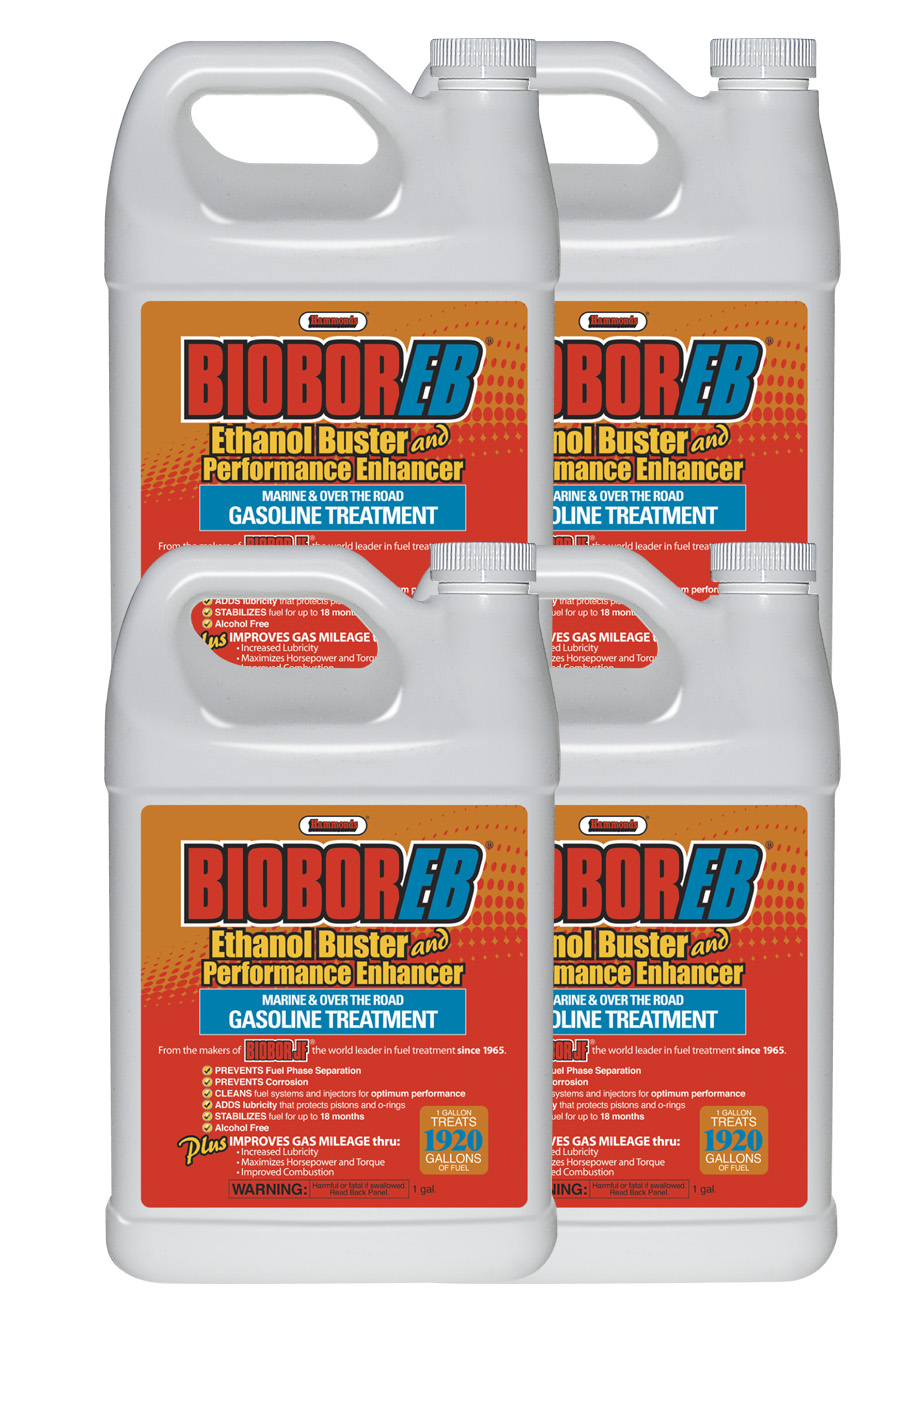 Biobor EB 1 gal. (4 Pack) - Ethanol Buster and Performance Enhancer